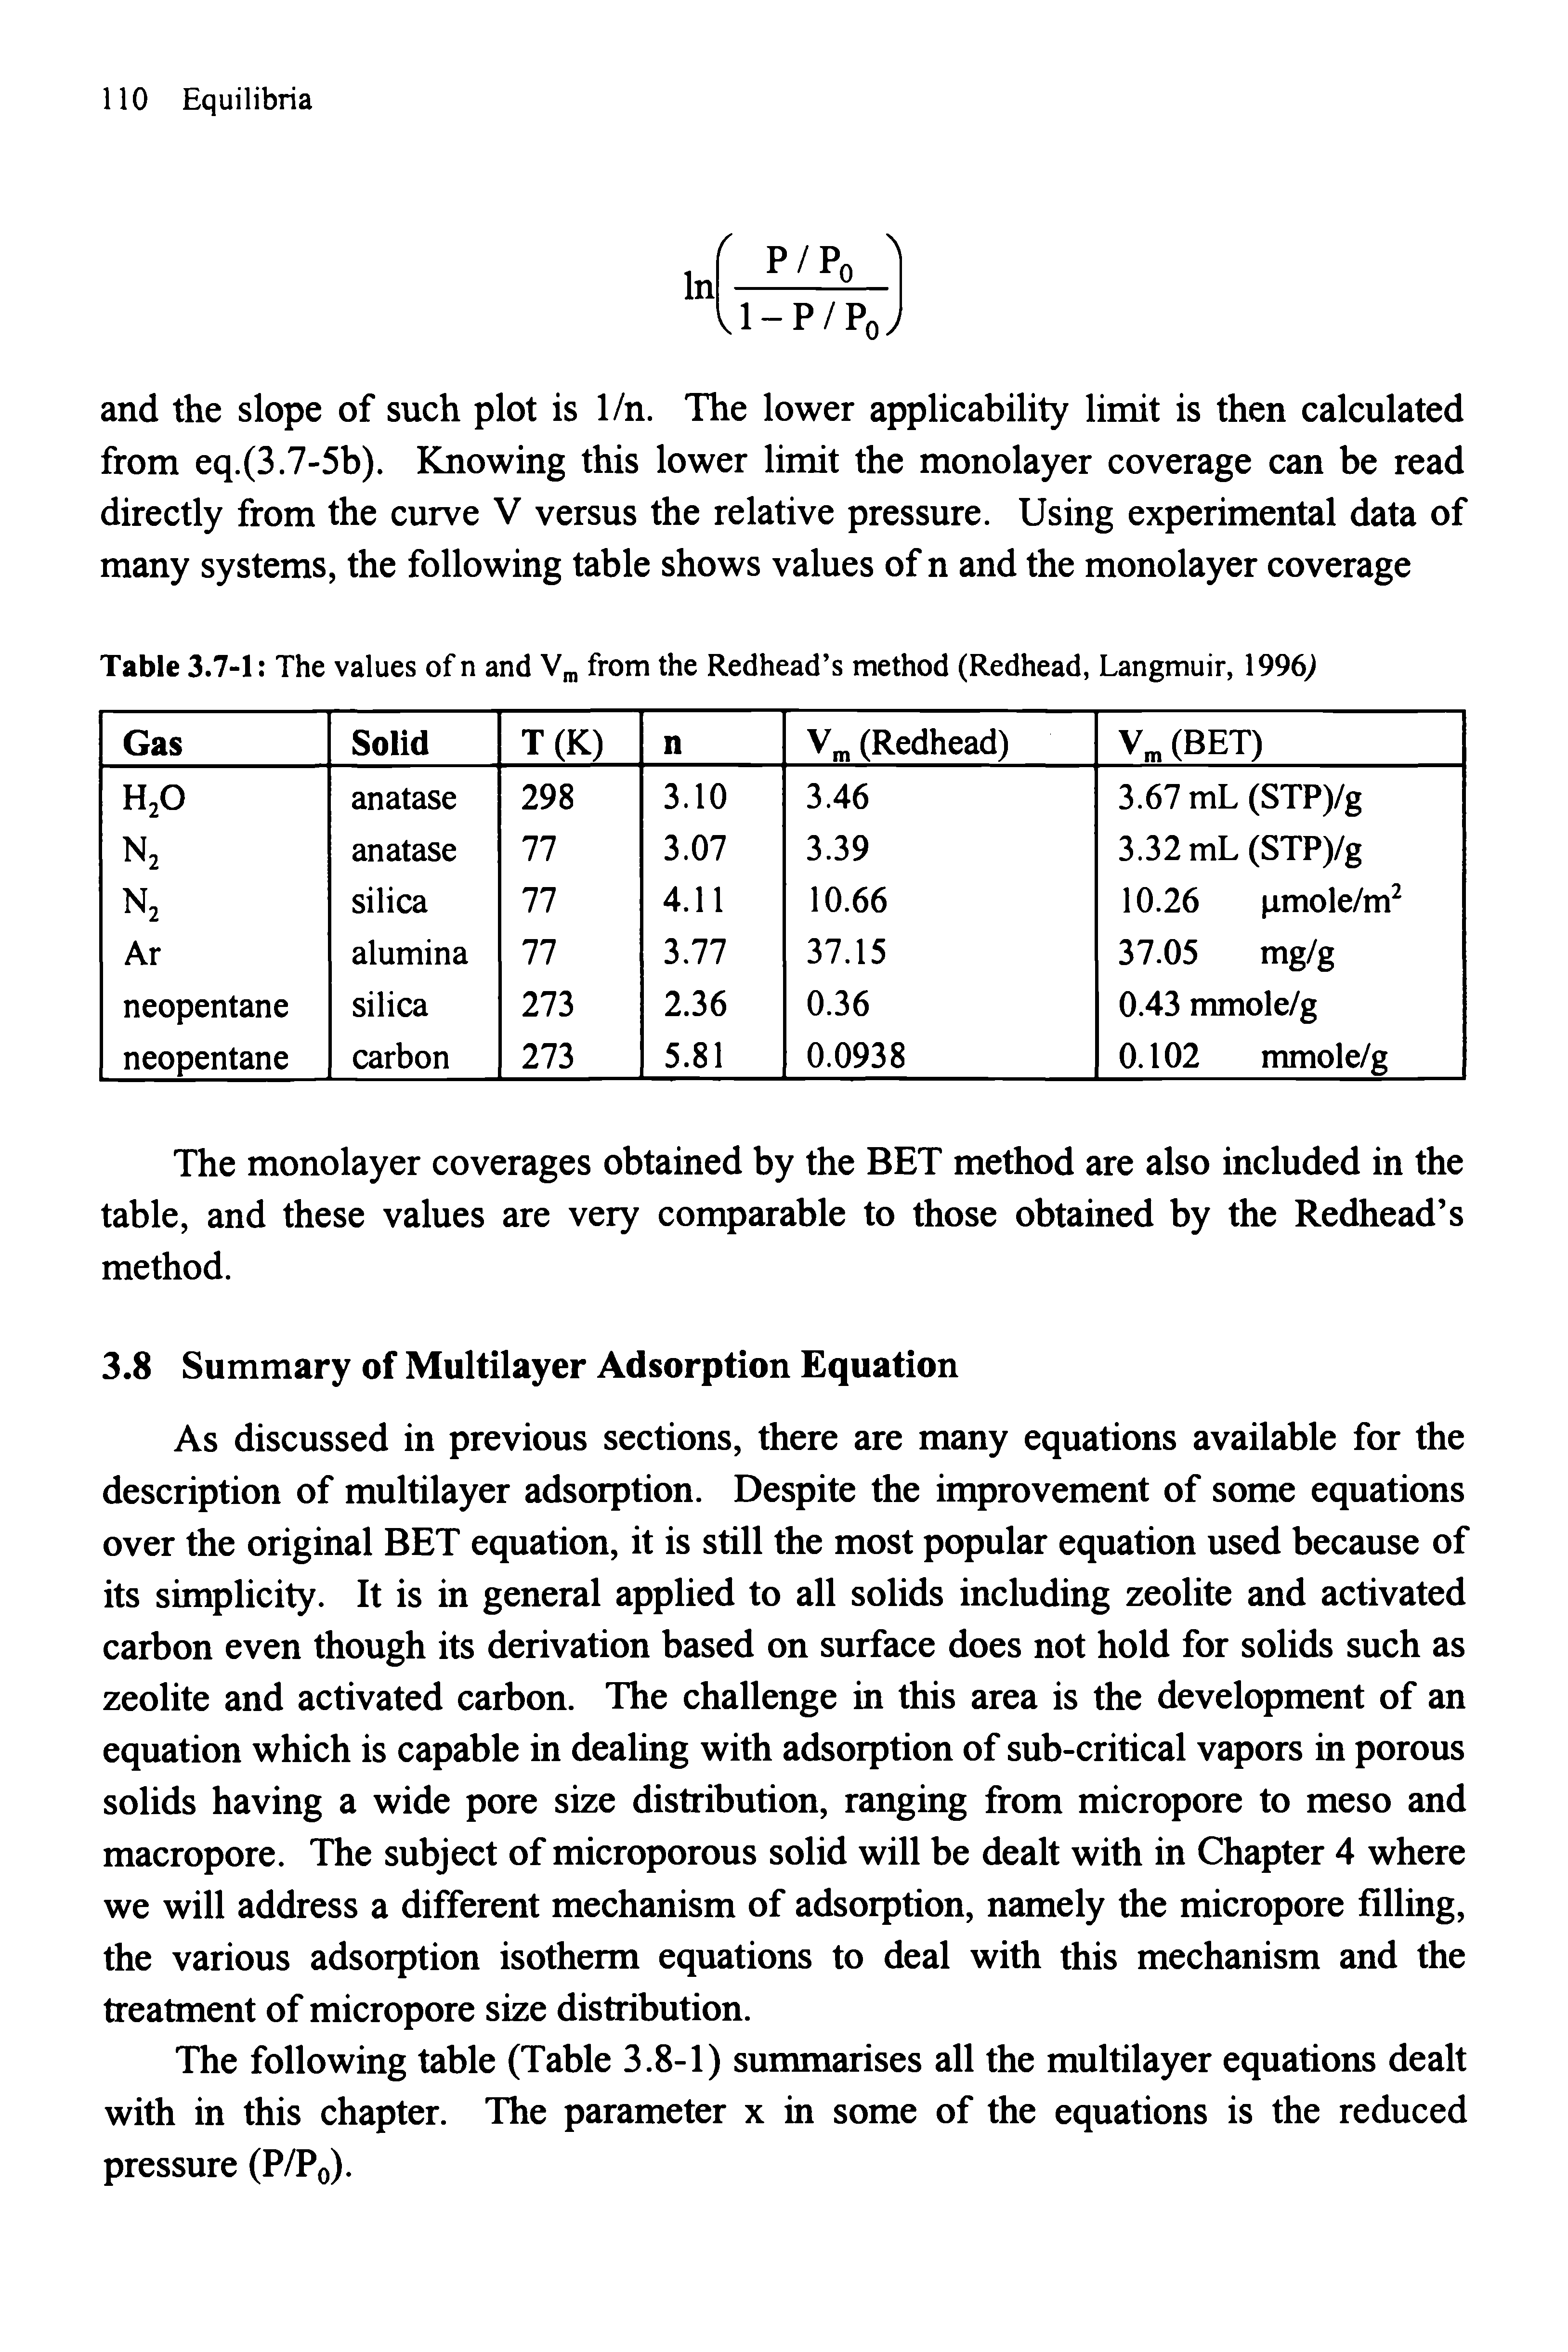 Table 3.7-1 The values of n and V , from the Redhead s method (Redhead, Langmuir, 1996 ...